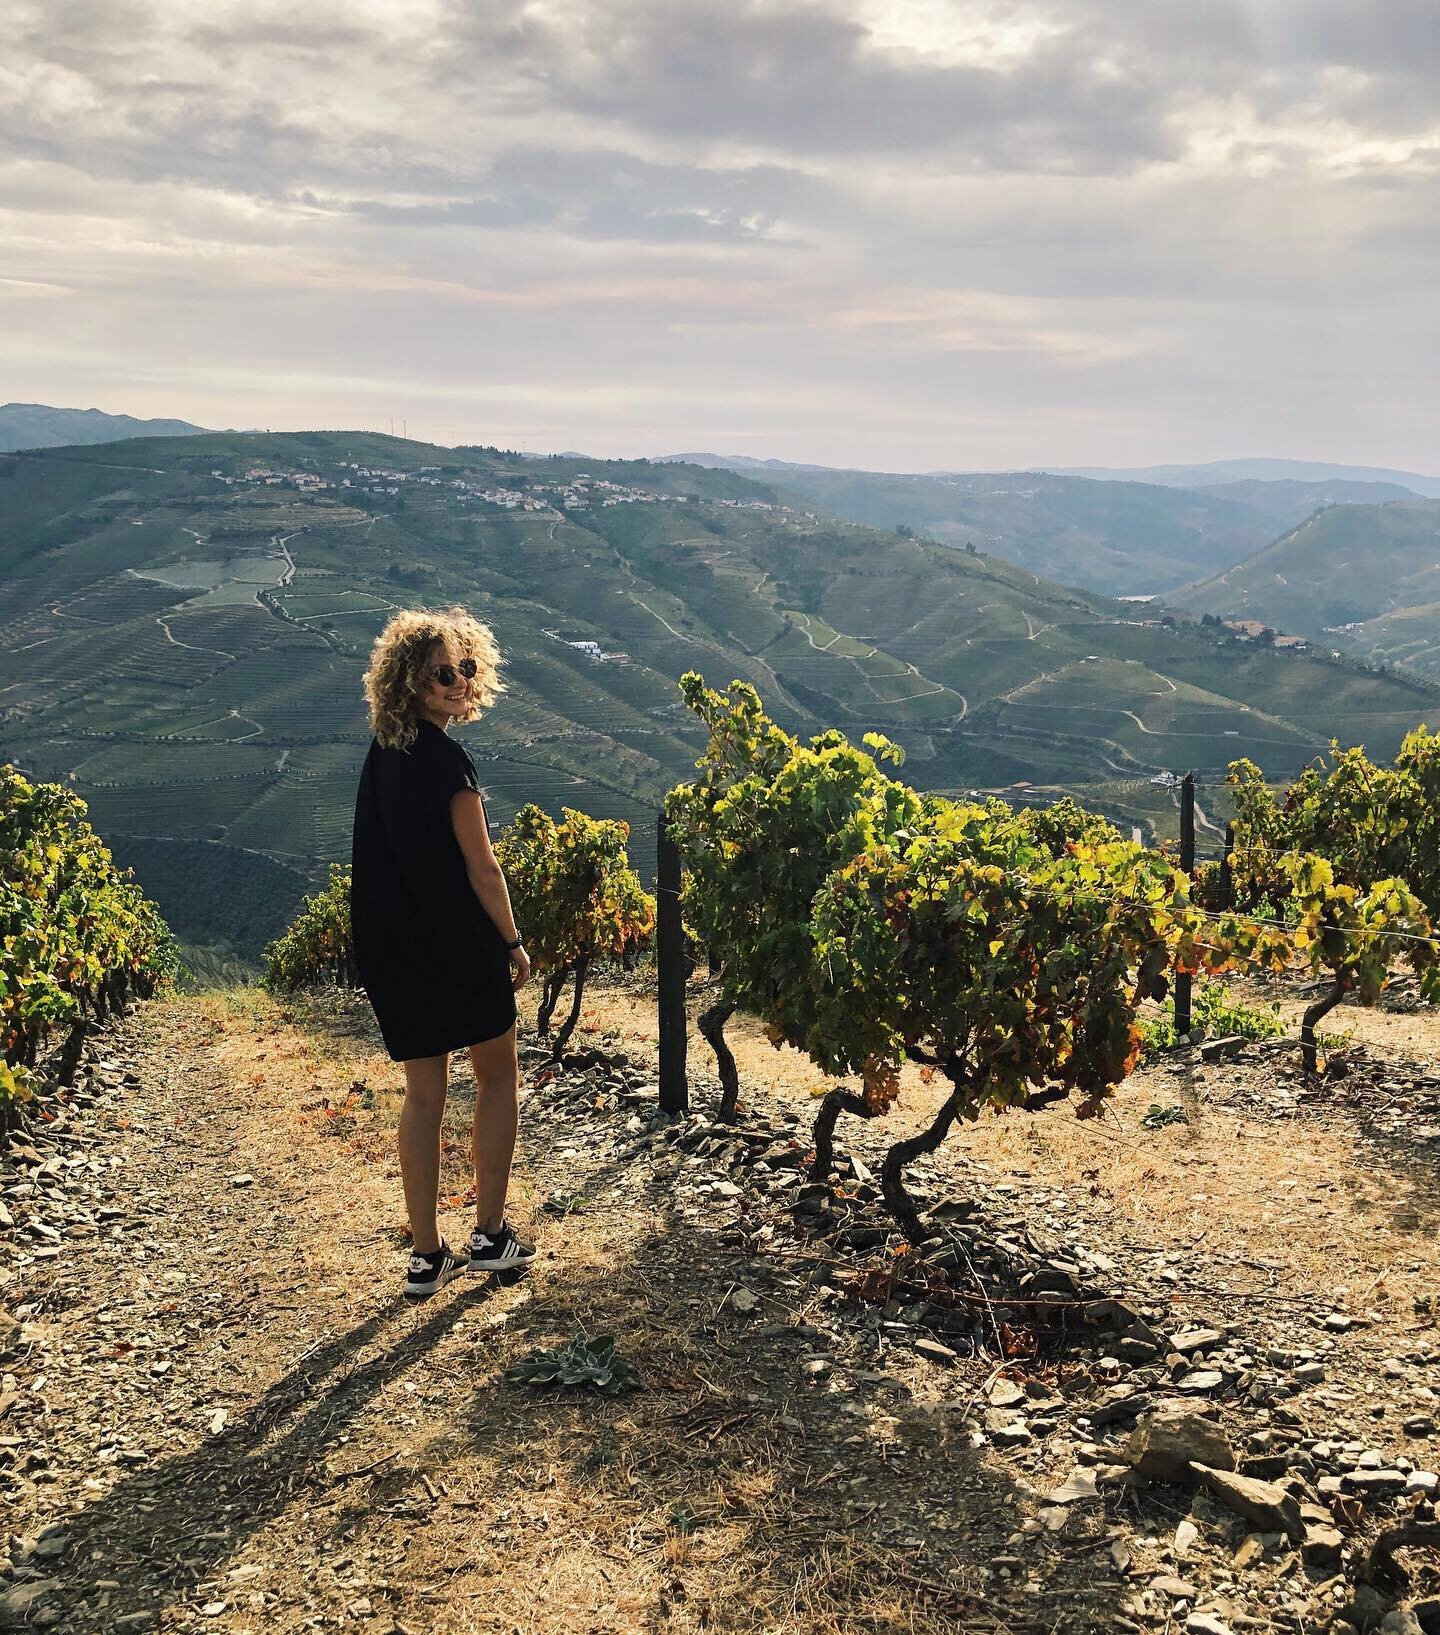 Old vines
Sweet grapes 
Big hair 
🍷
🍇
👩🏼&zwj;🦱
#duorovalley #portugal